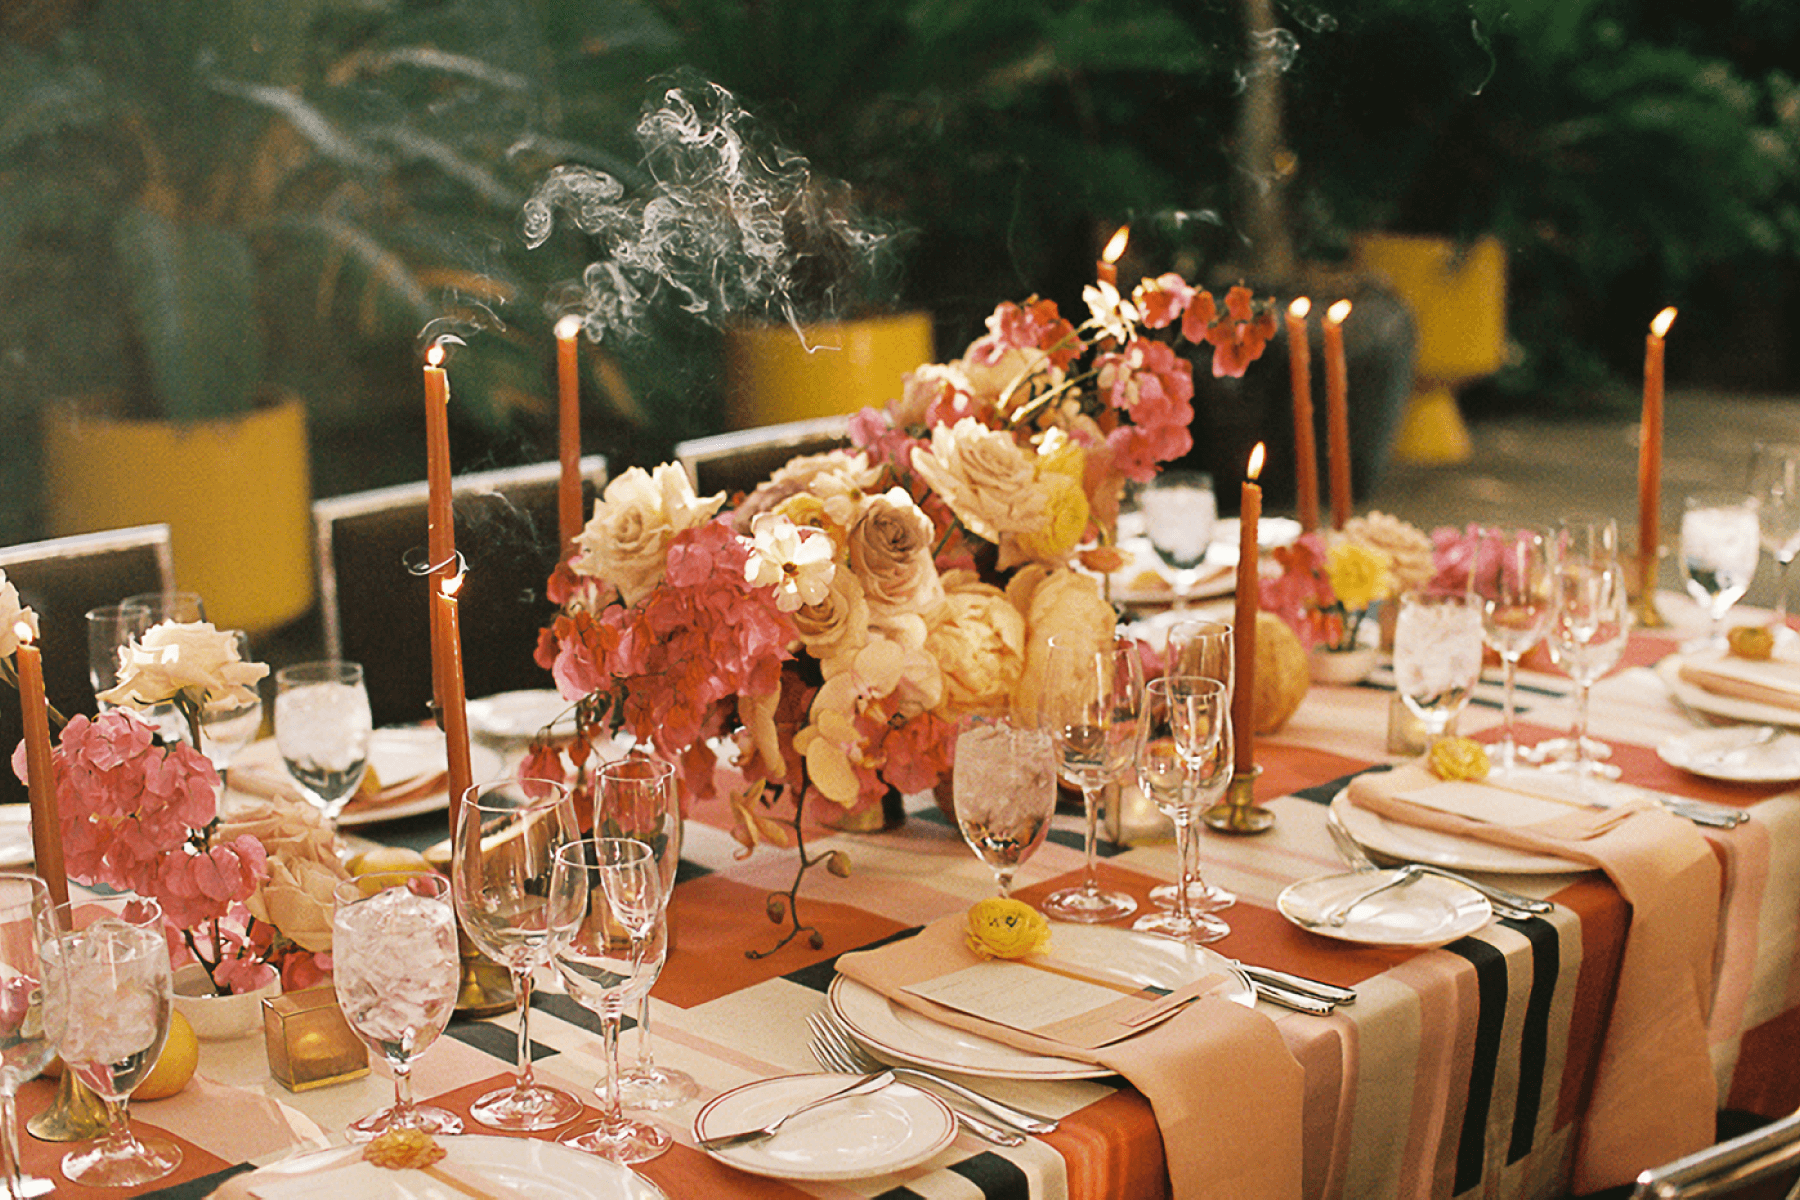 A crowded outdoor banquet table is set with flowers, candles, and a striped tablecloth in shades of pink, yellow, and orange.